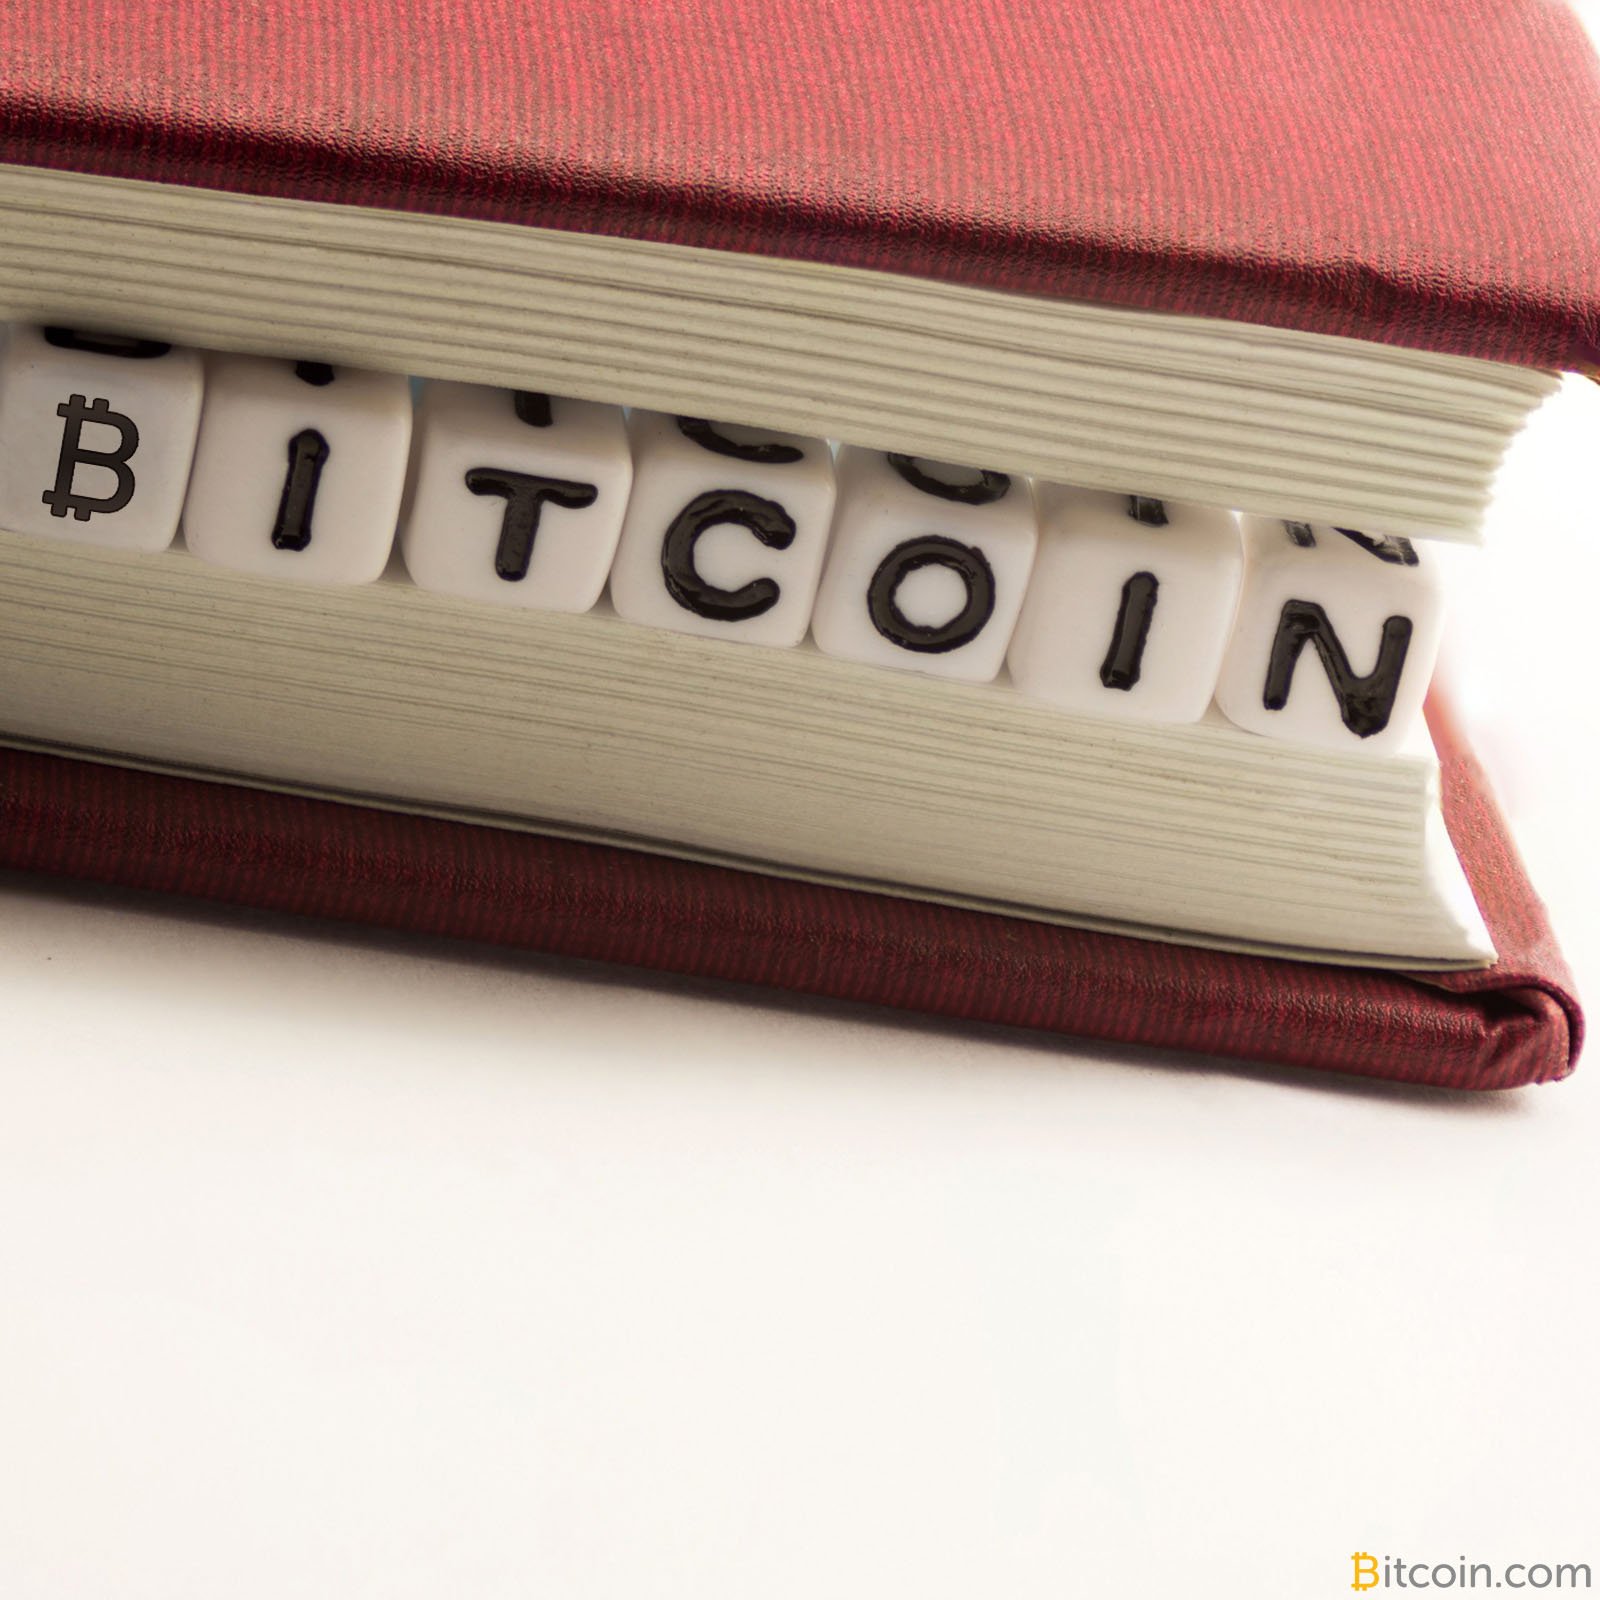 Nordic Law Firm Now Accepts Bitcoin Payments